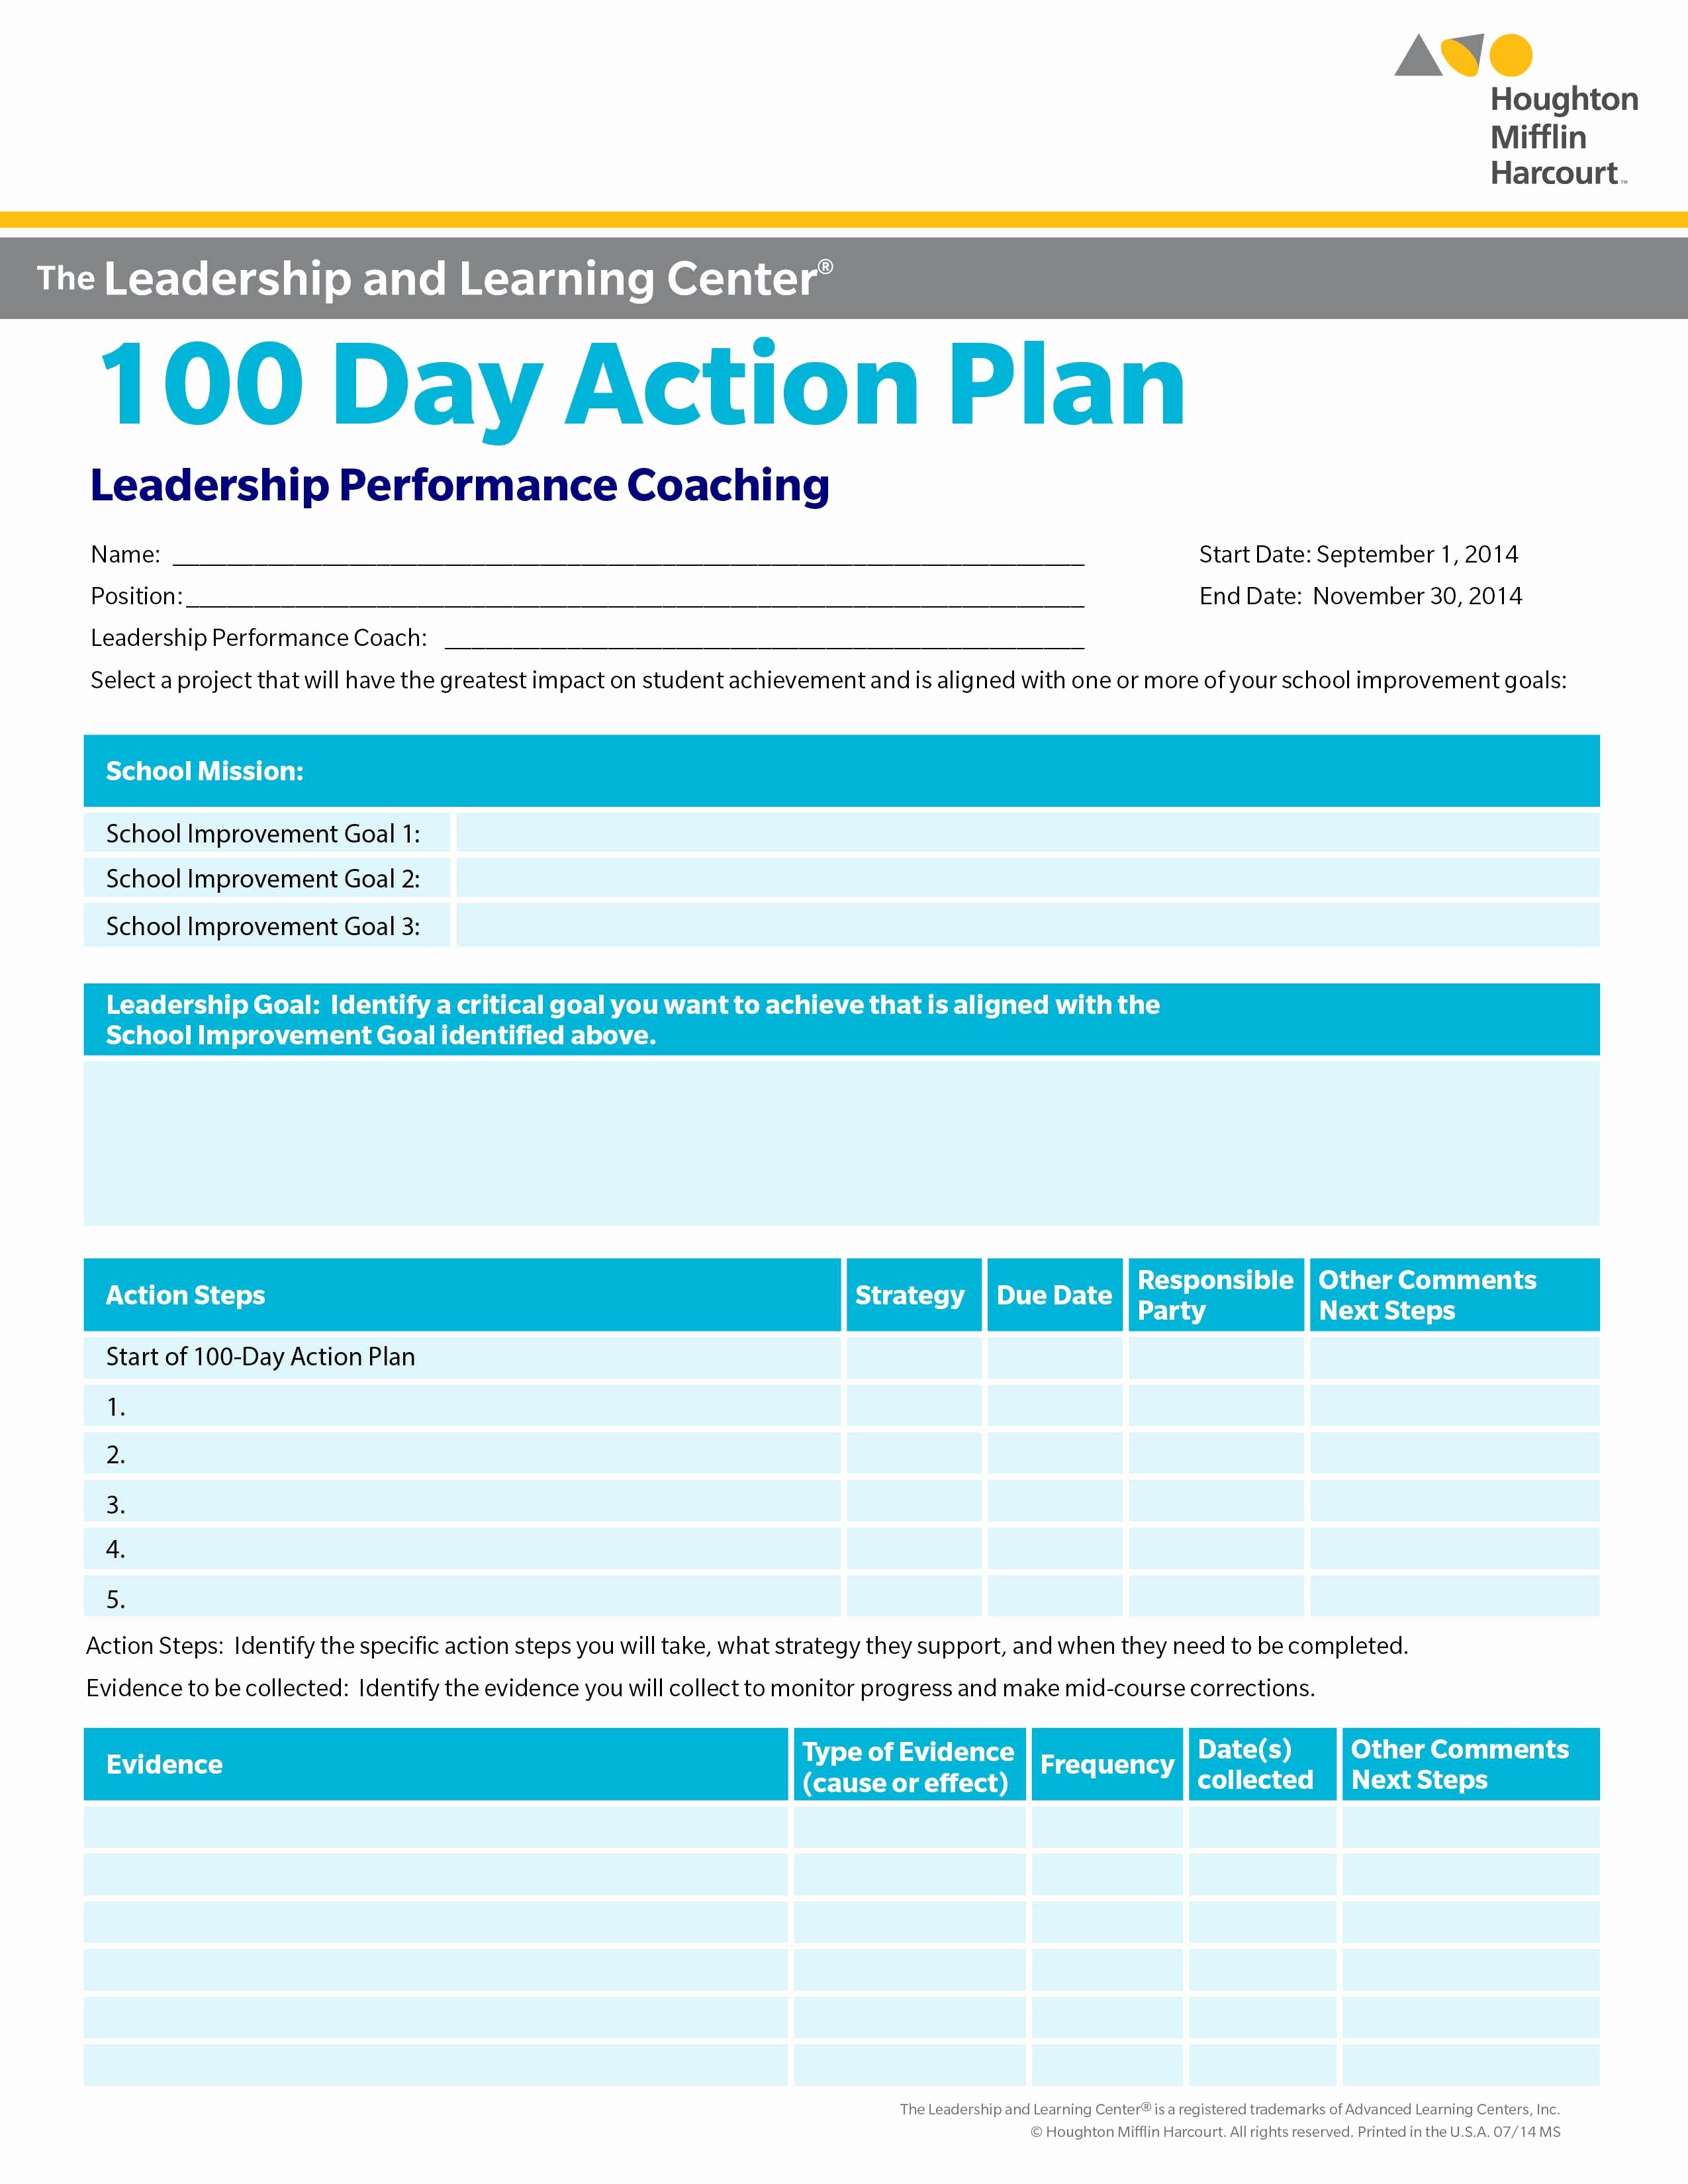 100 Day Planning Template Elegant School Improvement 100 Day Action Plan Select A Goal for School Improvement that Will Make A